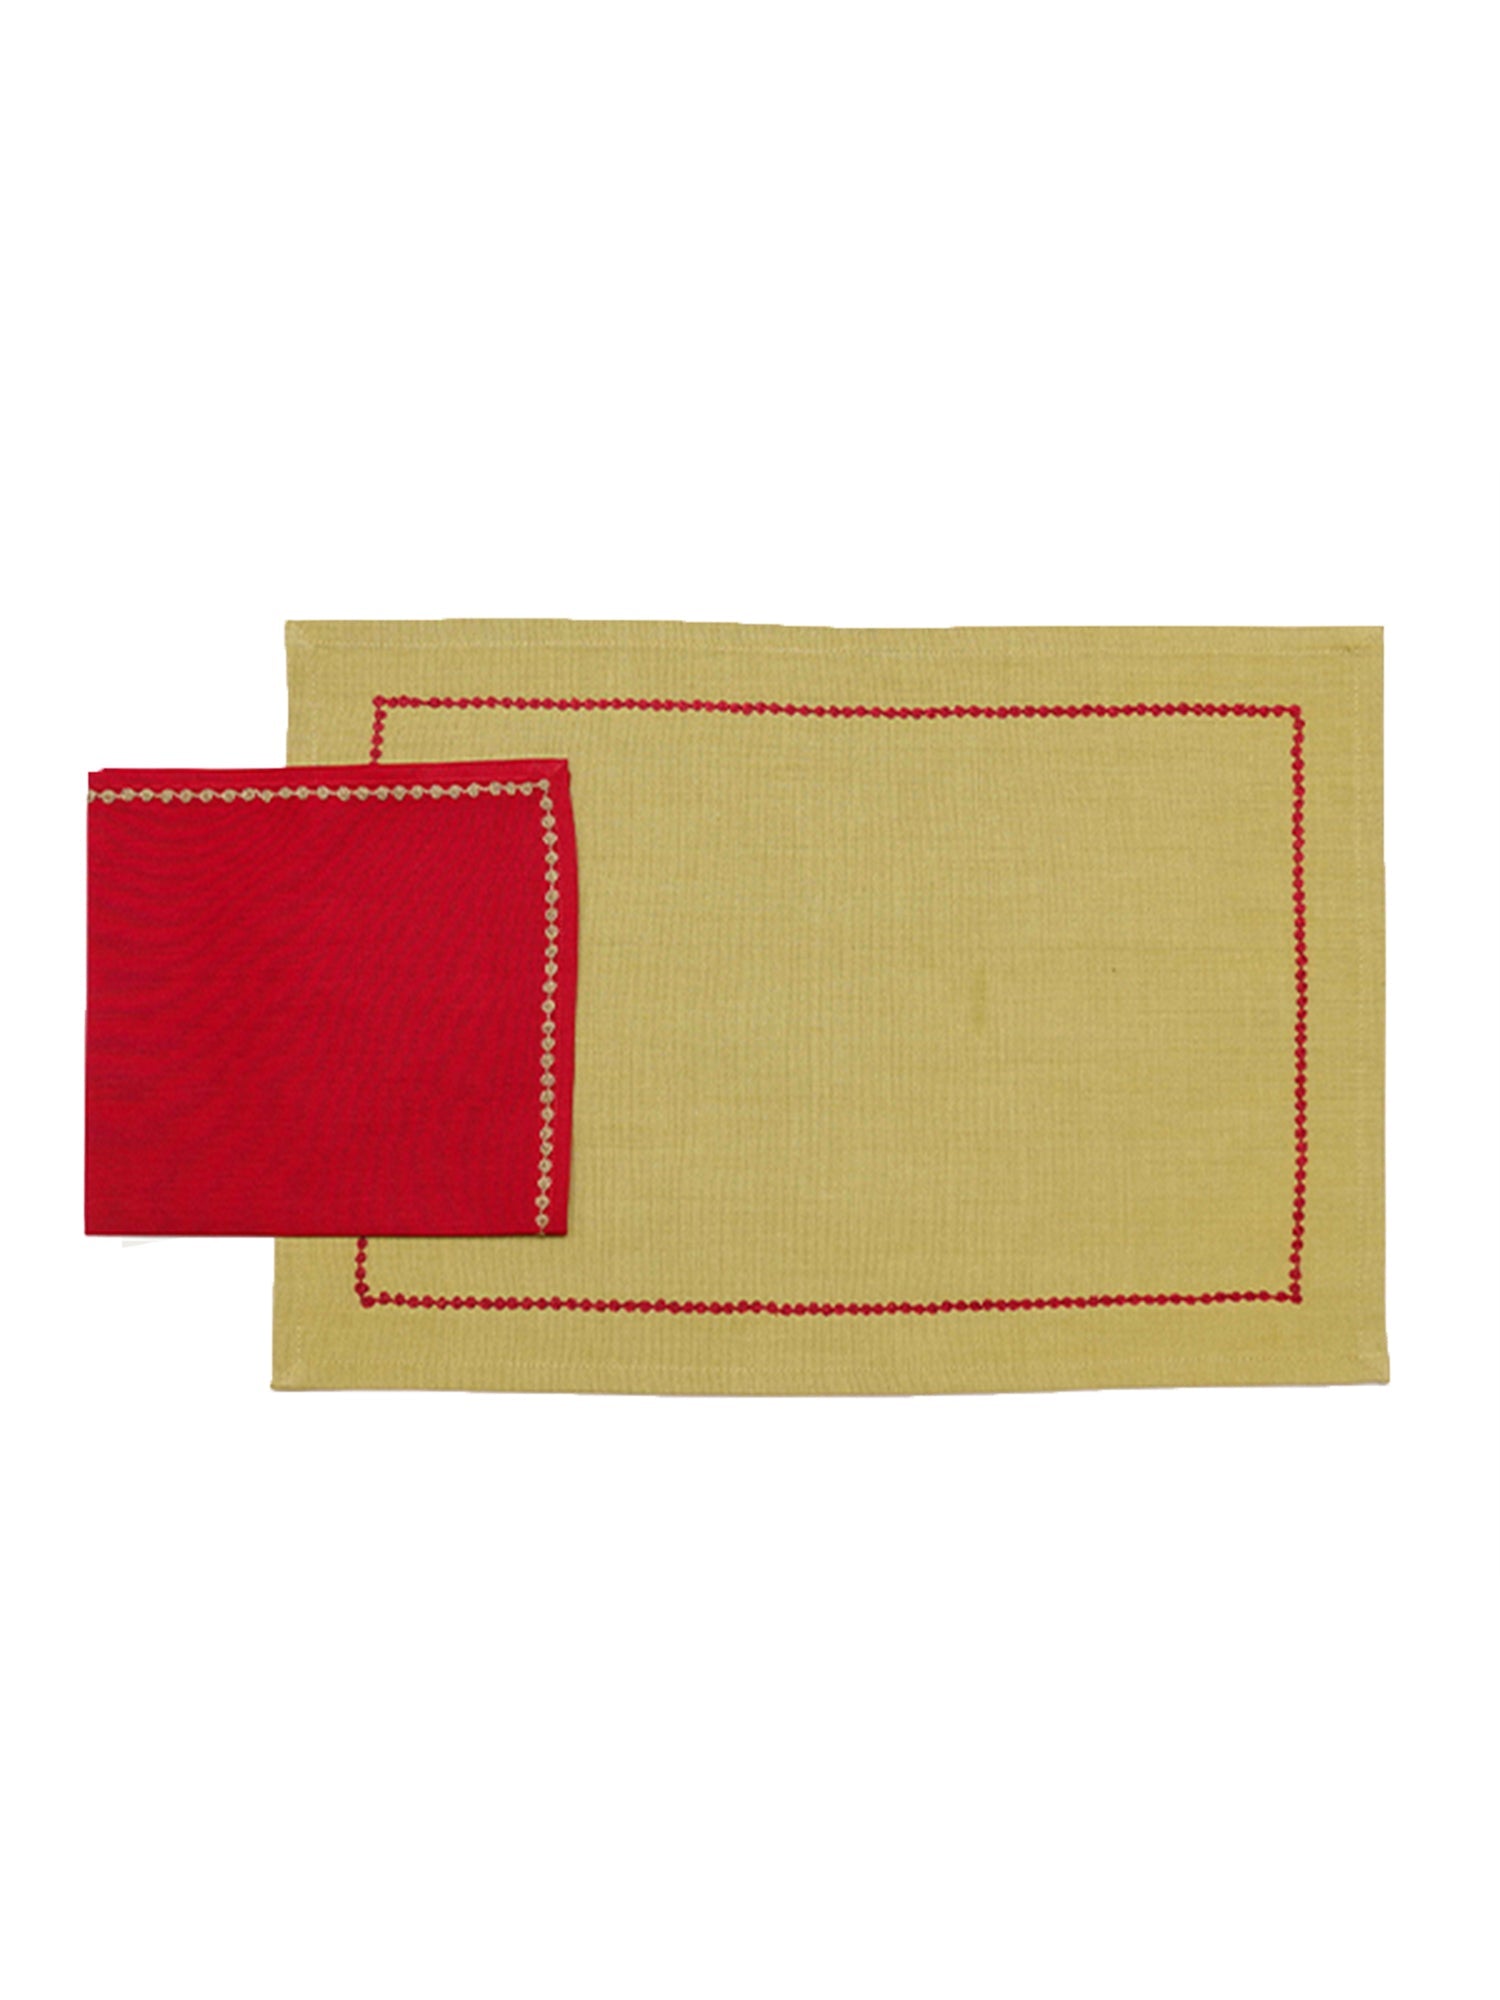 sage green colored embroidered placemats with red colored napkins in cotton fabric - 13x19 inch